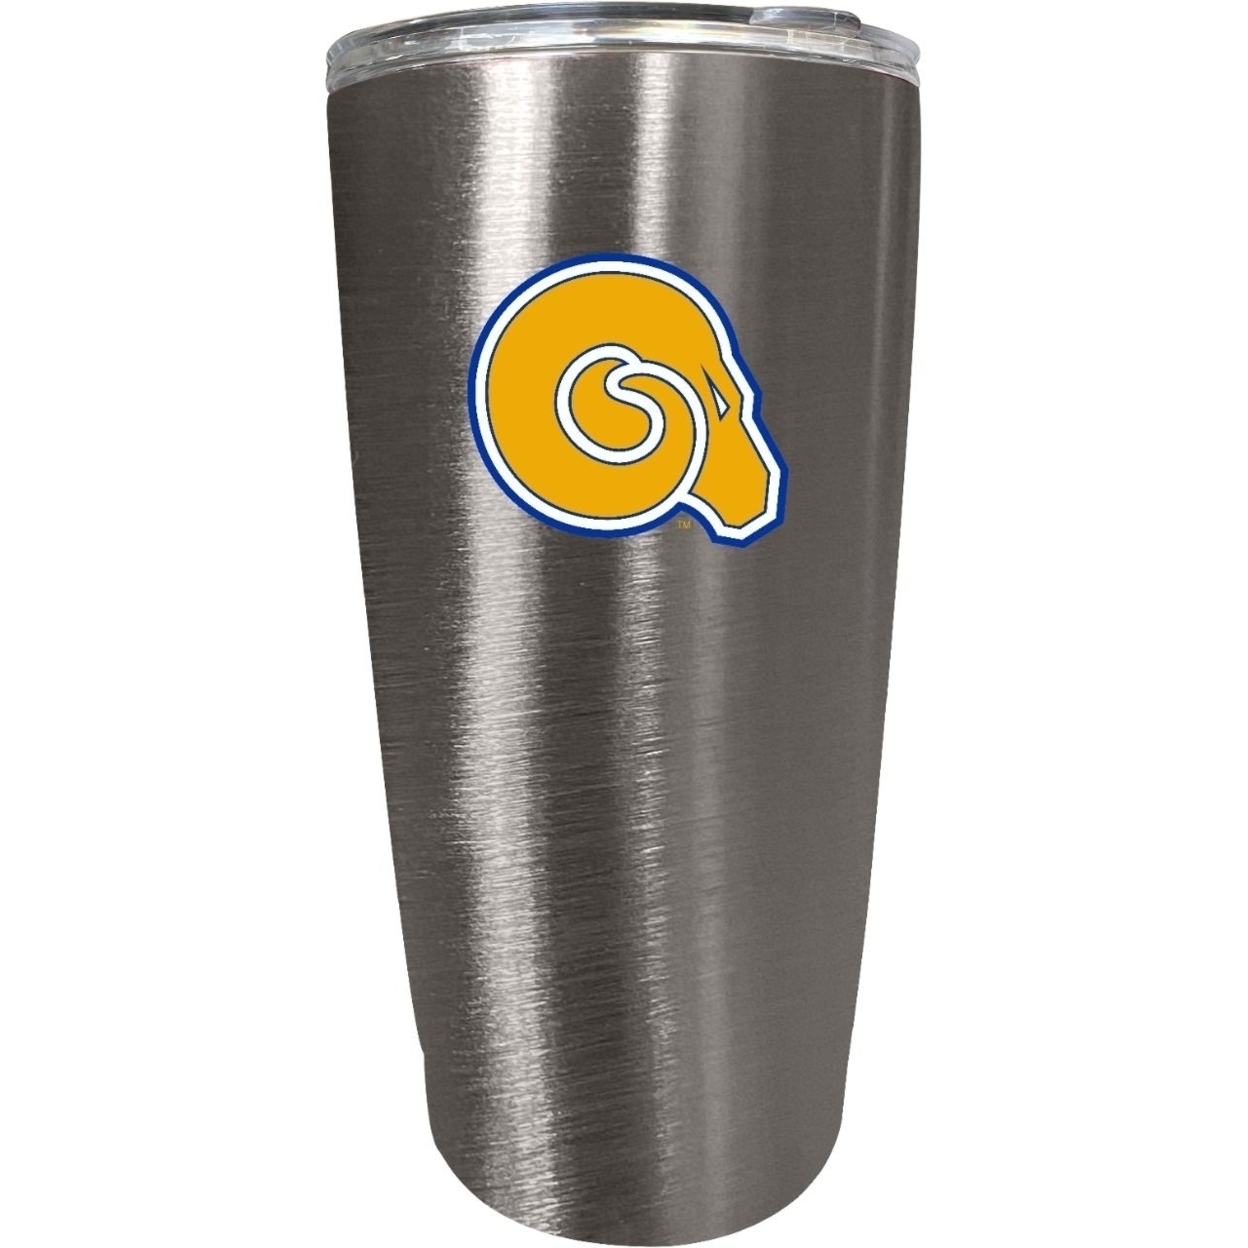 Albany State University 16 Oz Insulated Stainless Steel Tumbler Colorless